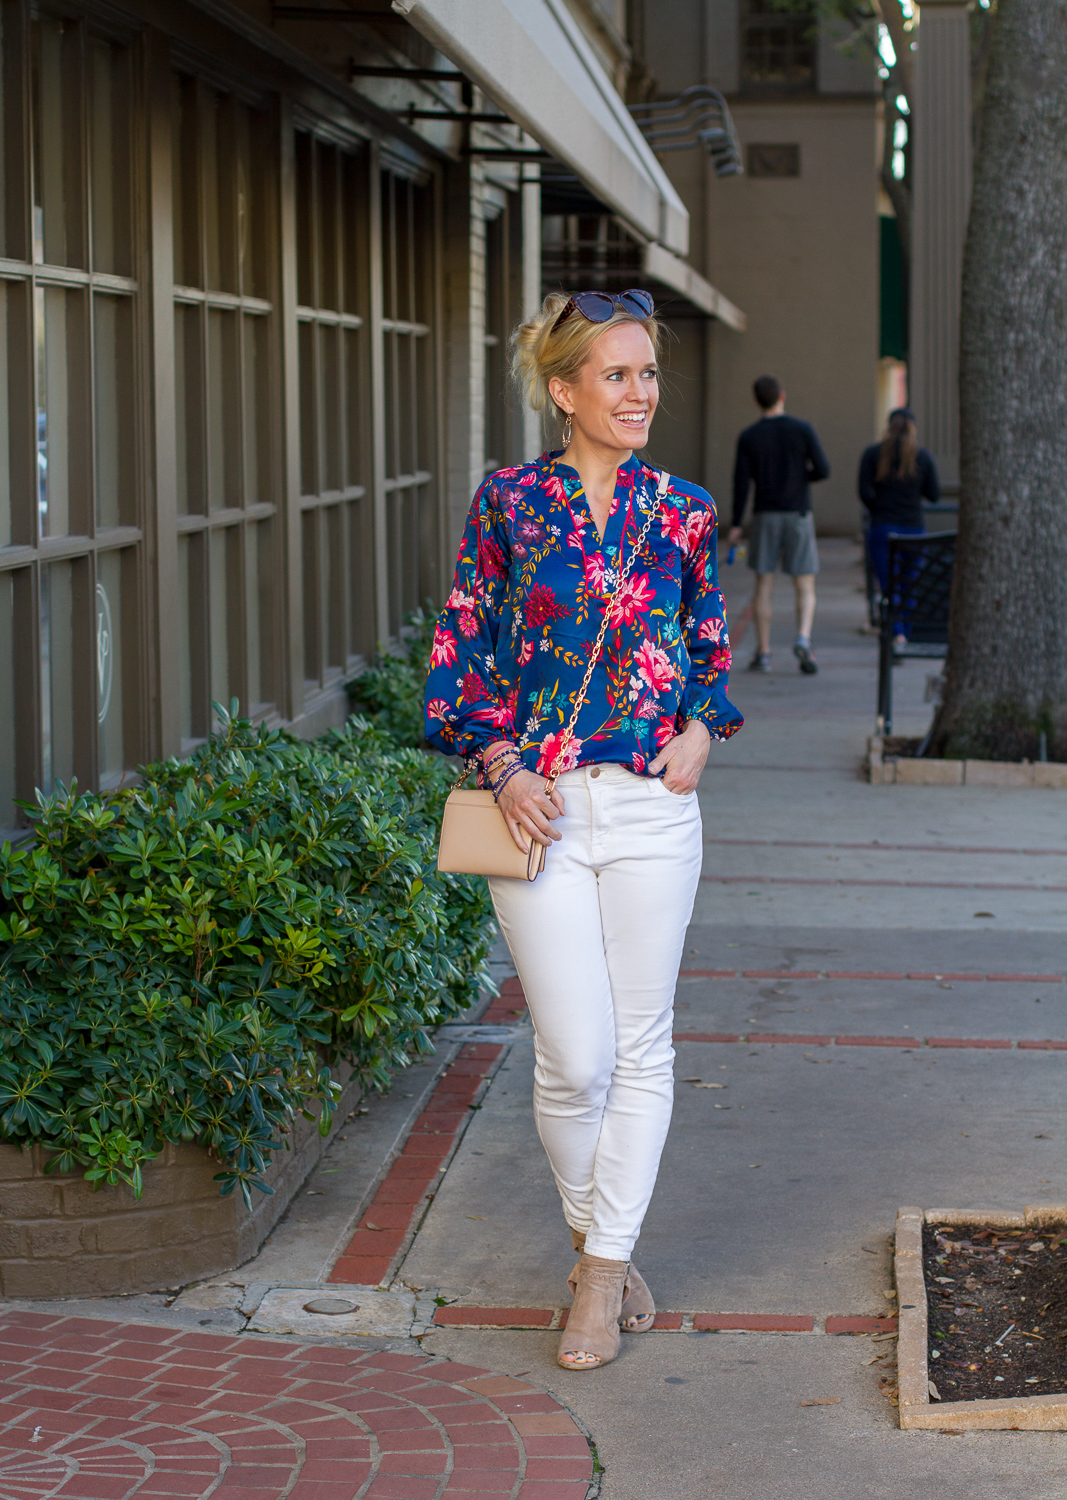 7 Ways to Become More Confident in Yourself + Floral Blouse - joyfully so